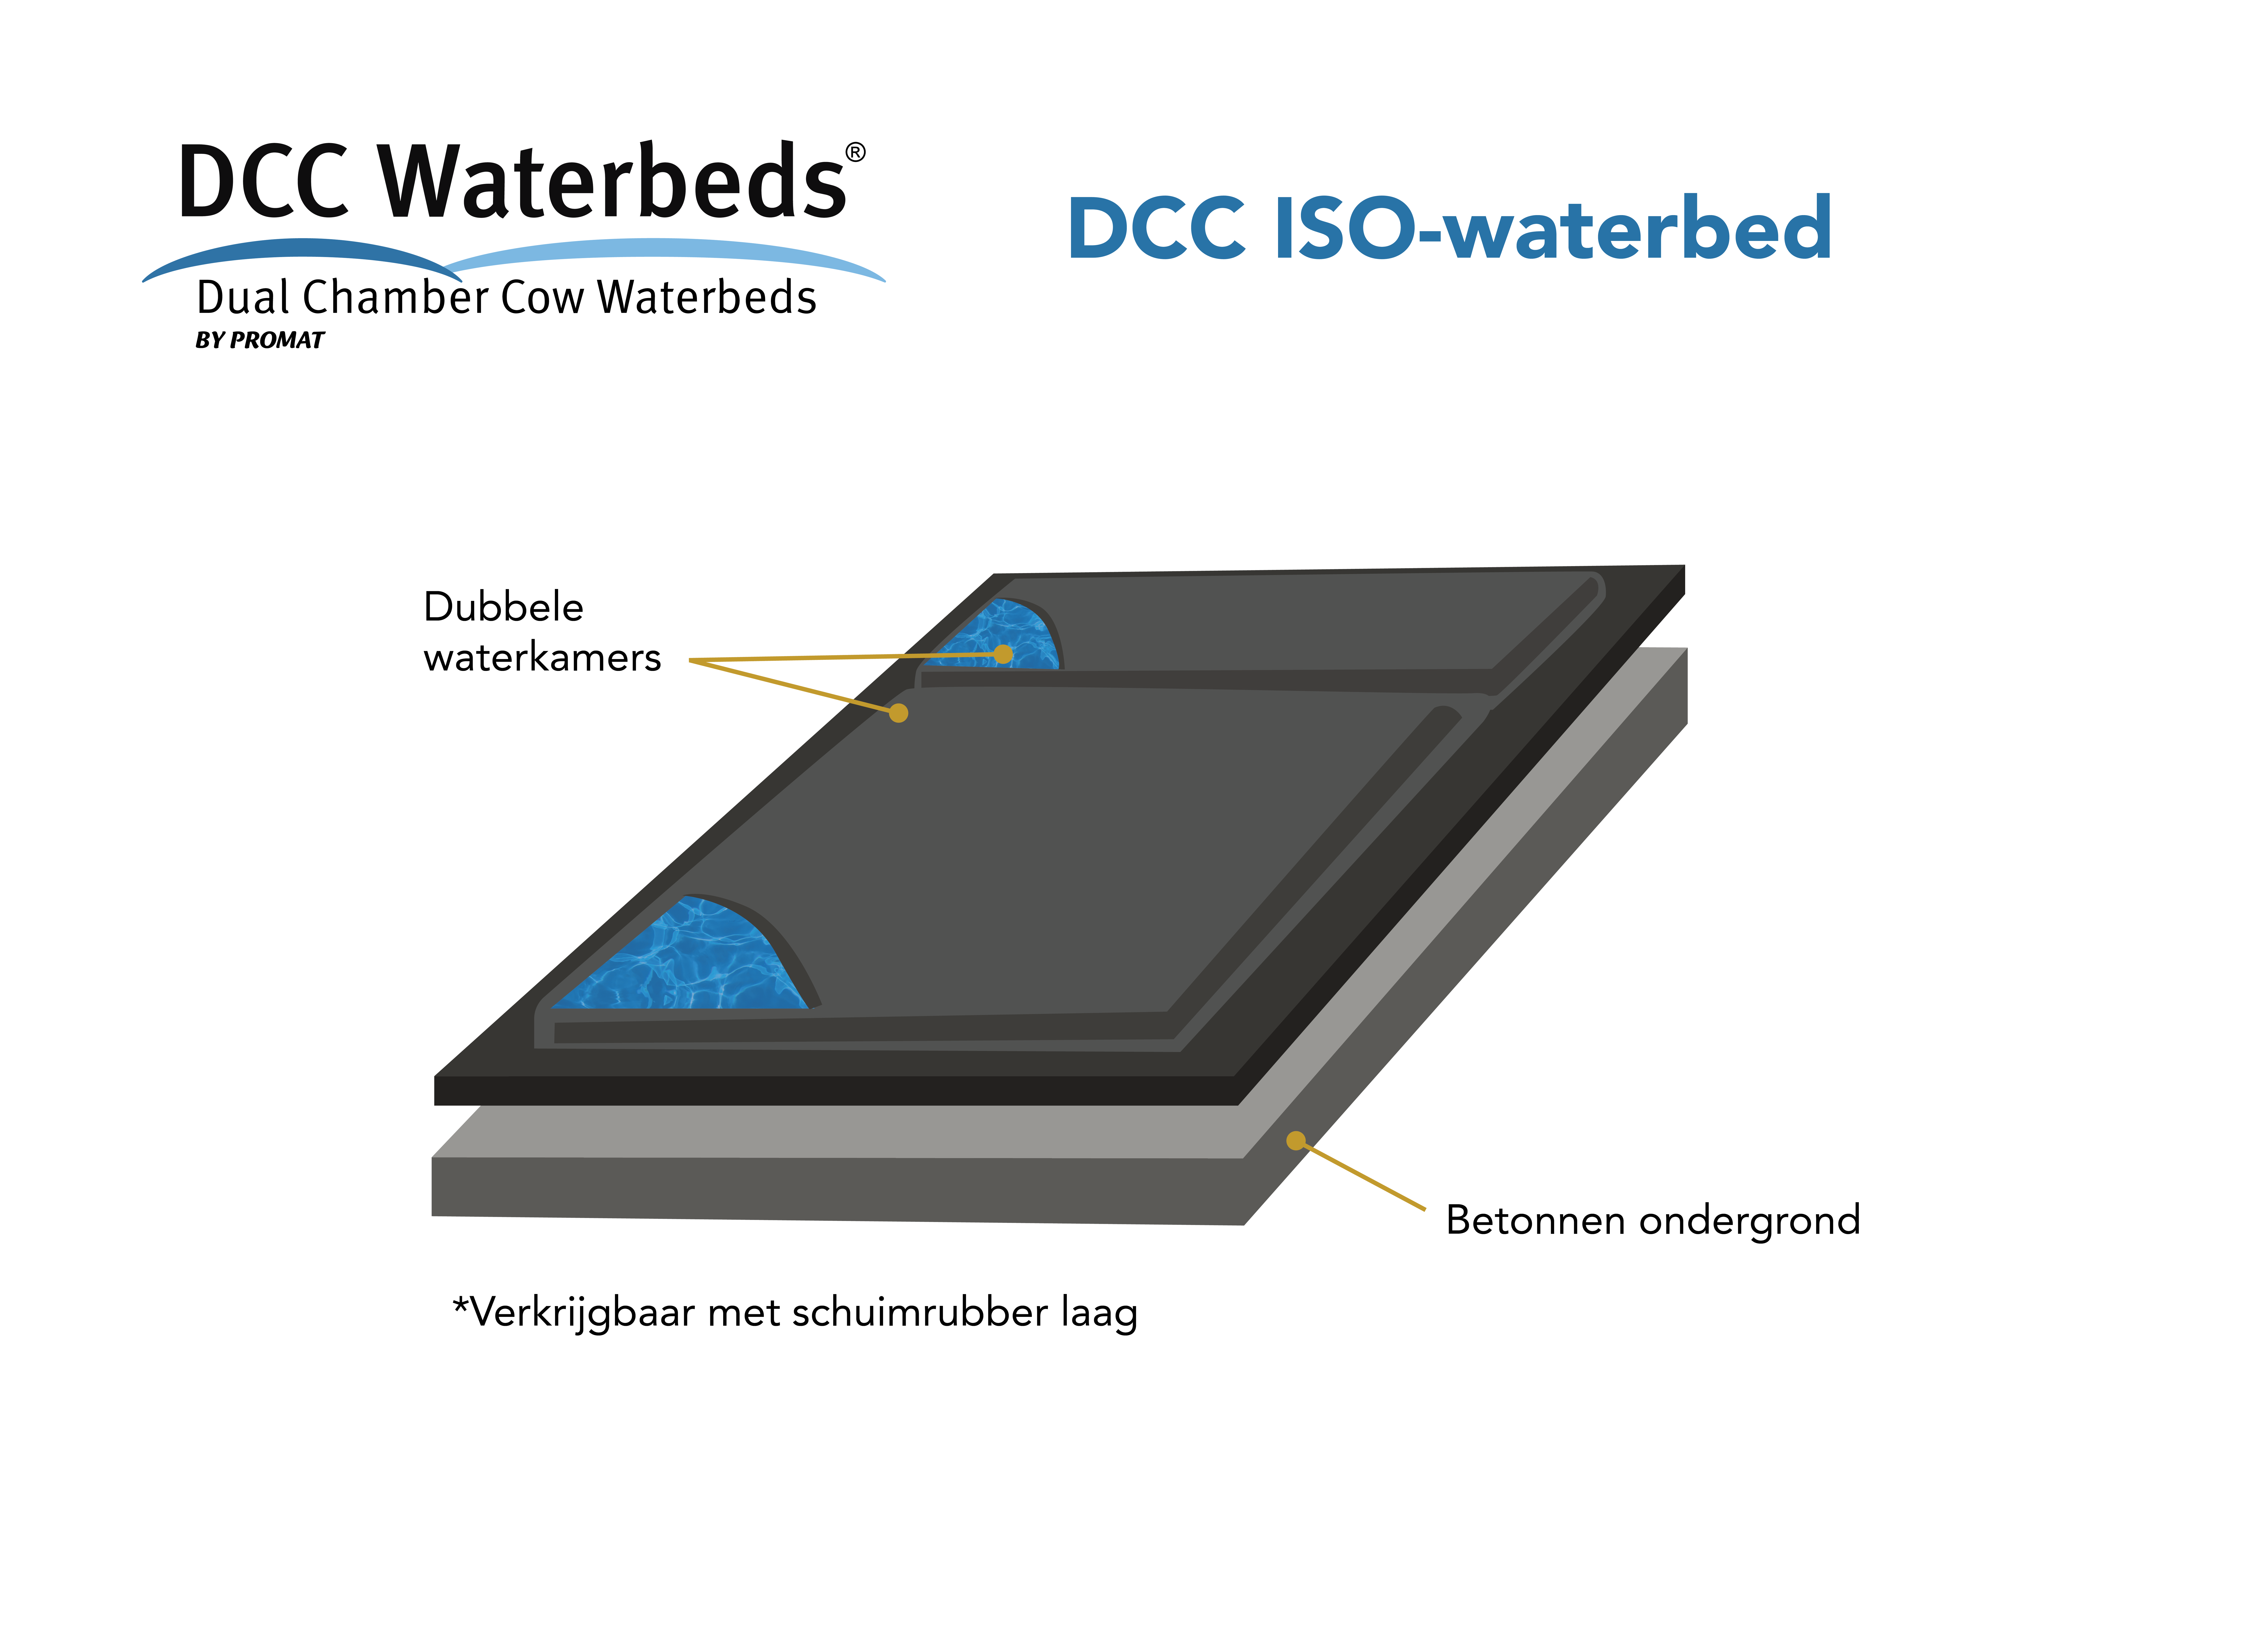 DCC ISO-waterbed